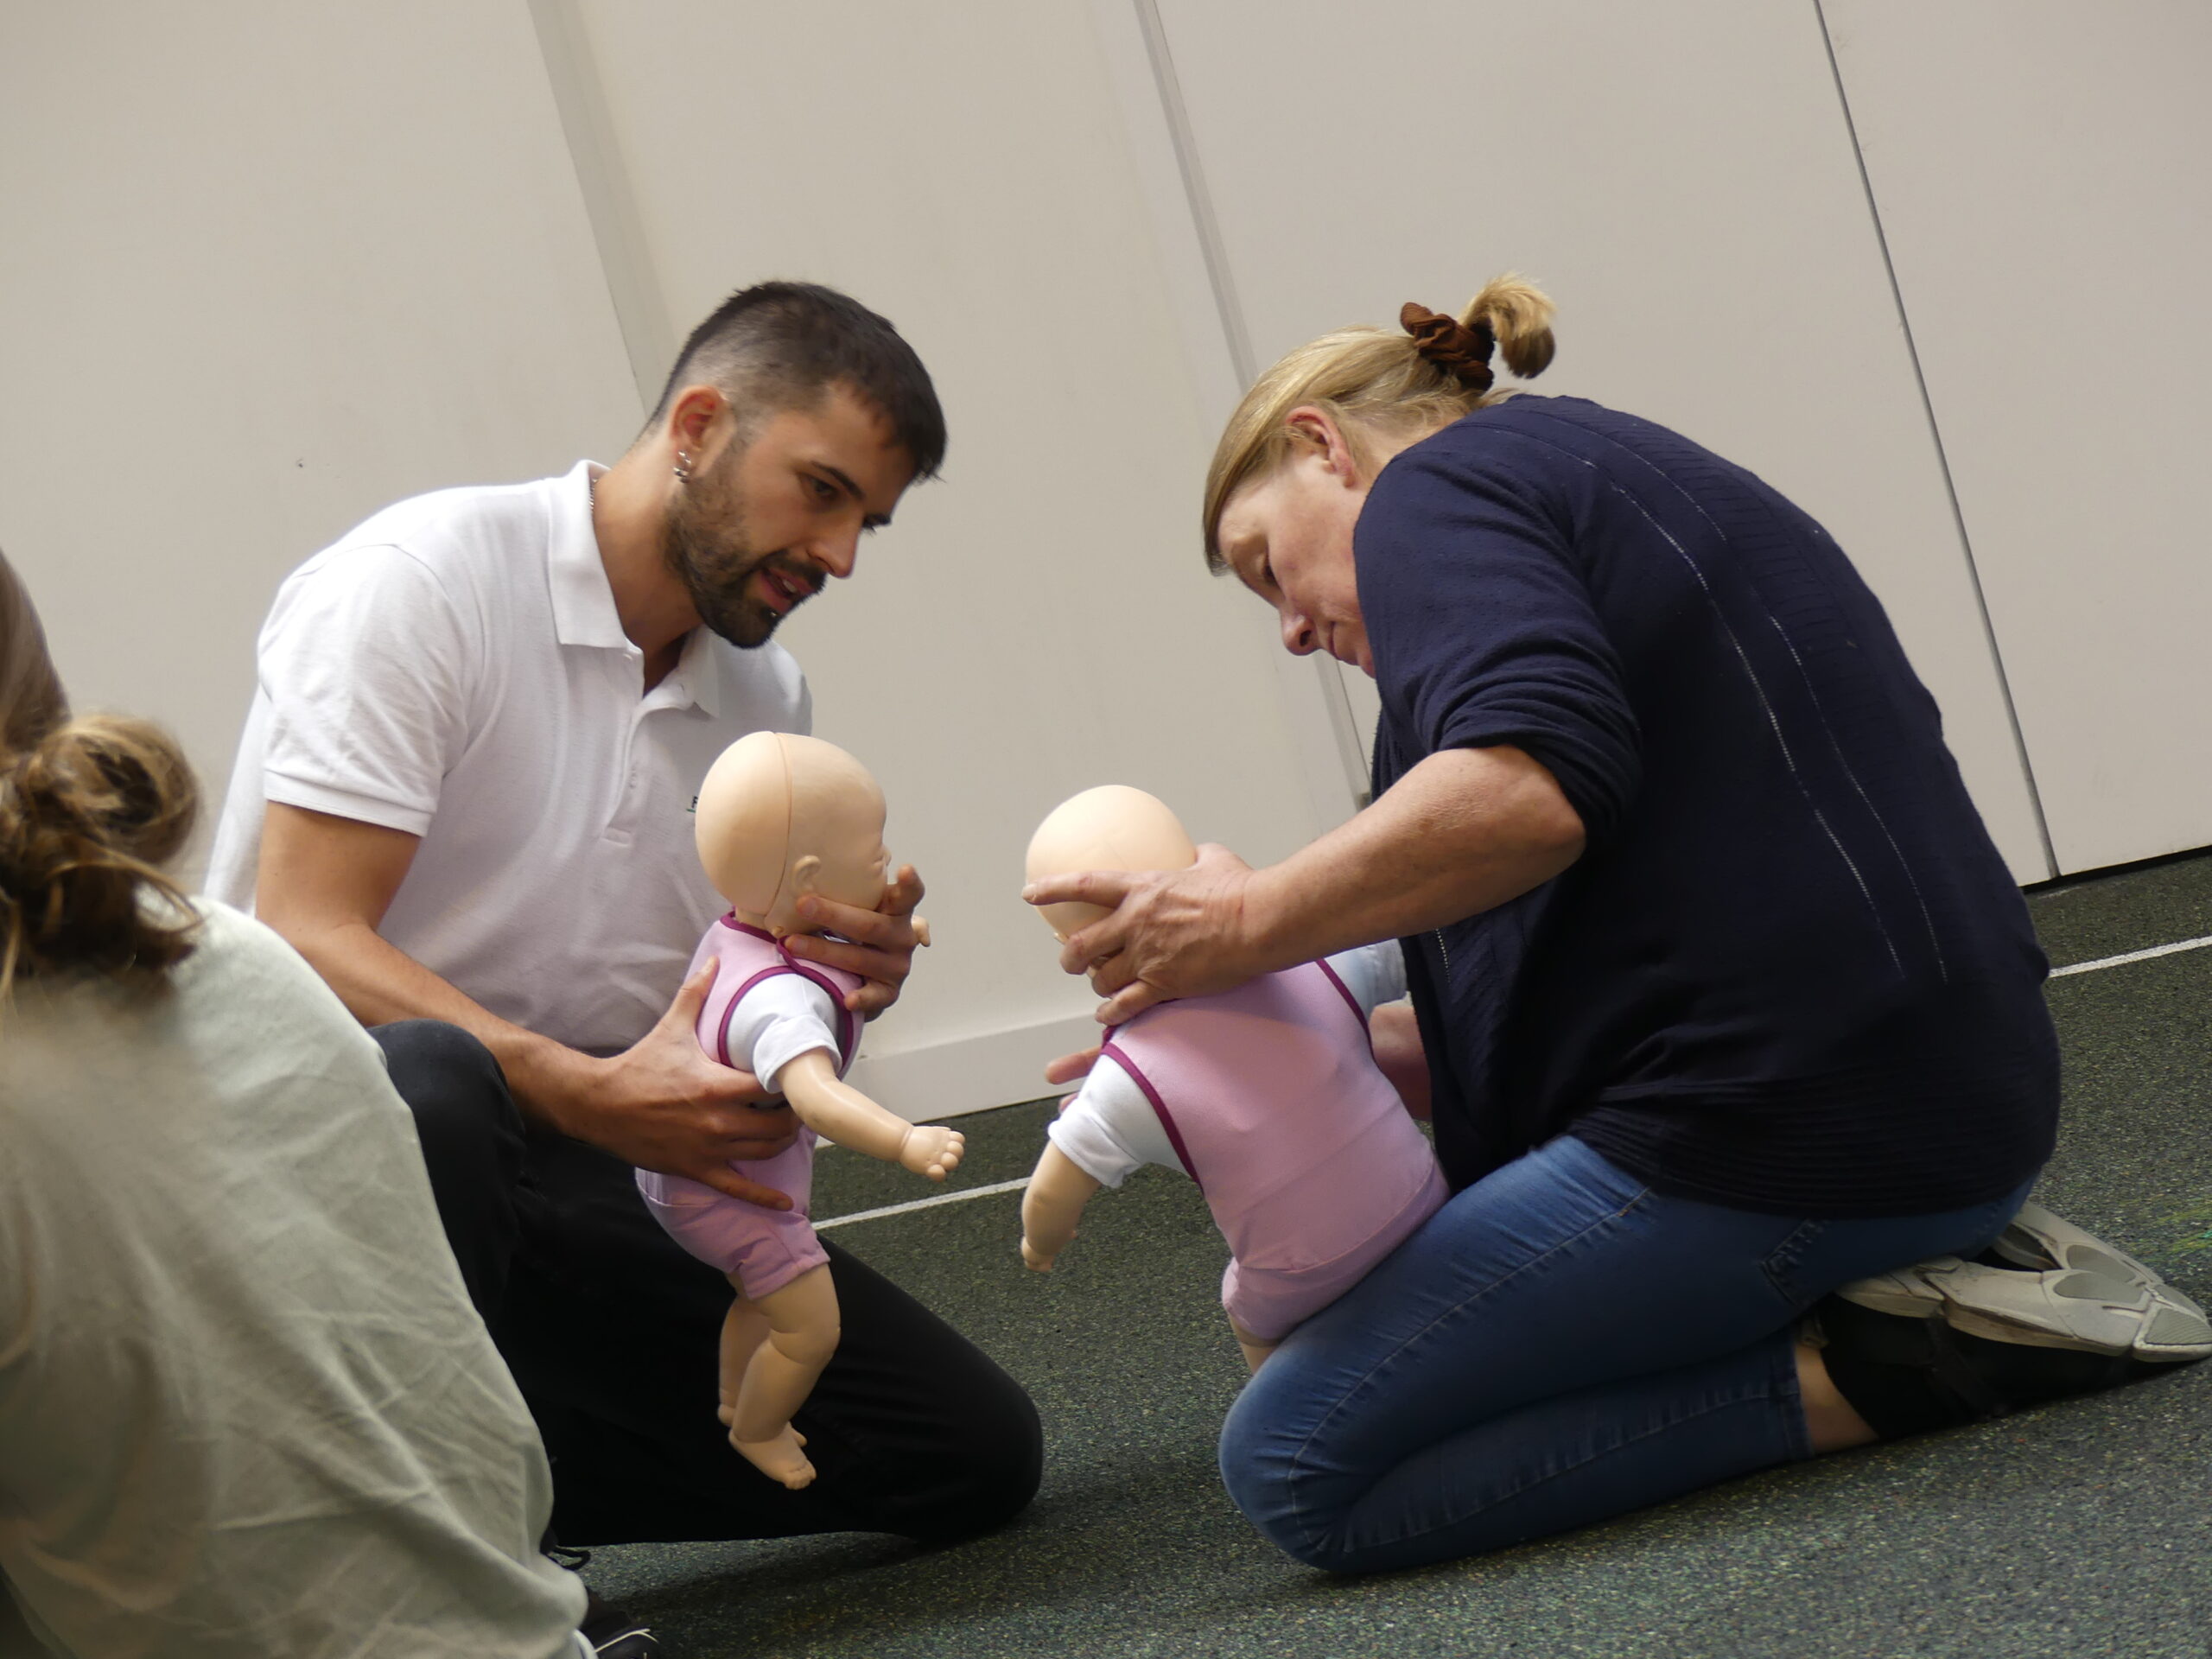 Paediatric First aid training course demonstrating positioning for choking baby